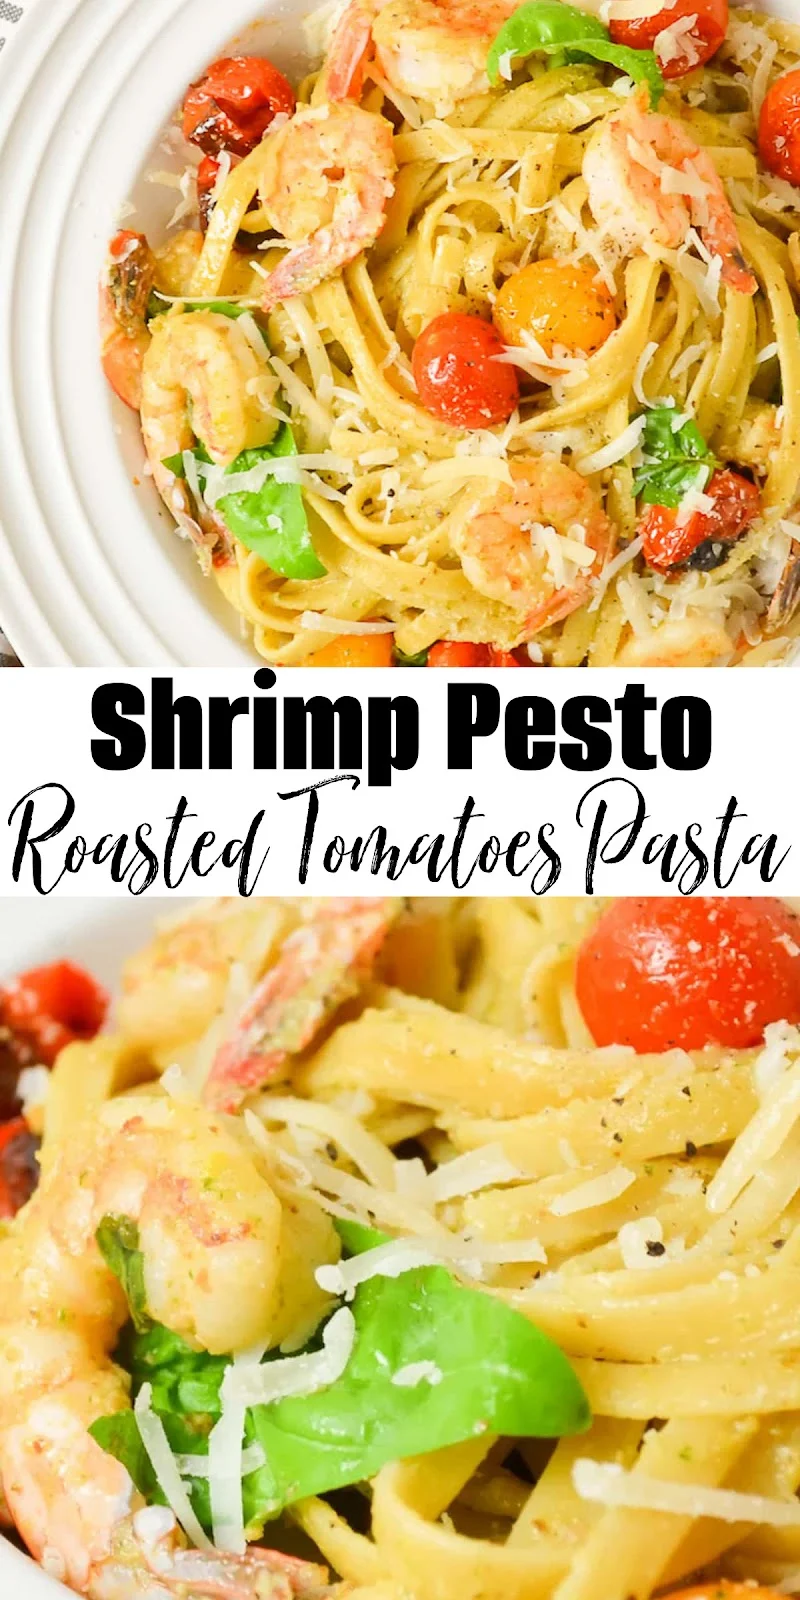 2 photos of Shrimp Pesto Pasta with Roasted Tomatoes. A white banner between the two photos with black text Shrimp Pesto Roasted Tomato Pasta. 